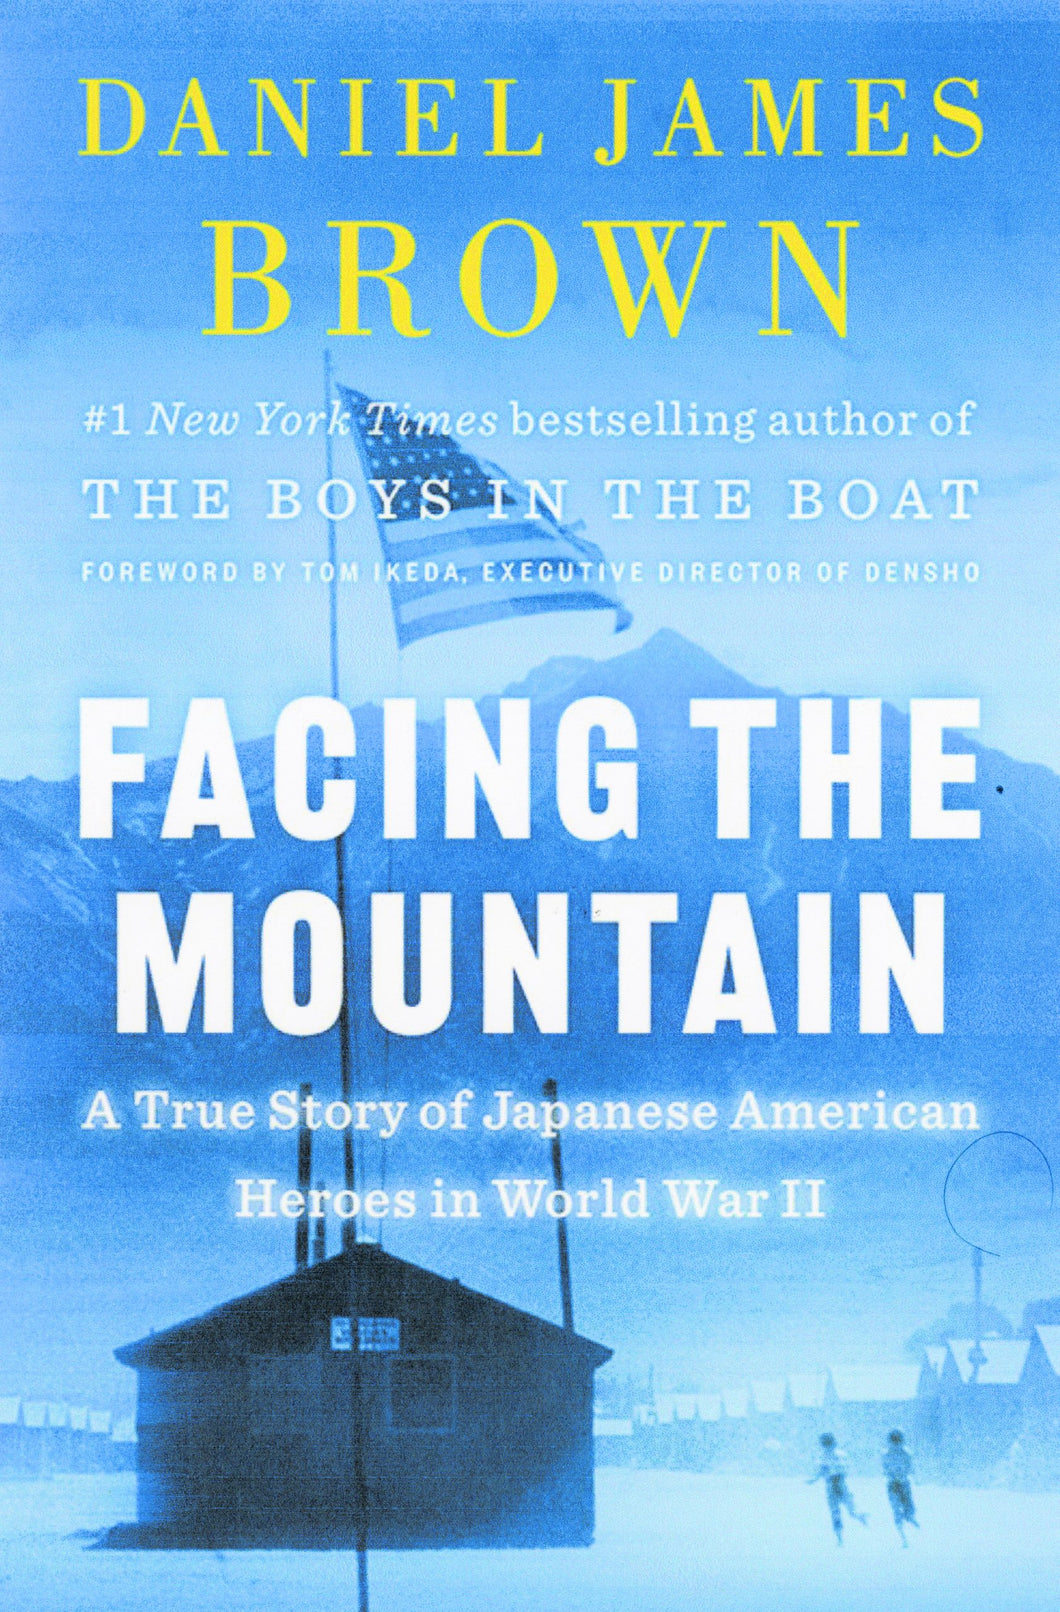 Facing the Mountain: A True Story of Japanese American Heroes in World War II by Daniel James Brown / Hardcover or Paperback - NEW BOOK OR BOOK BOX